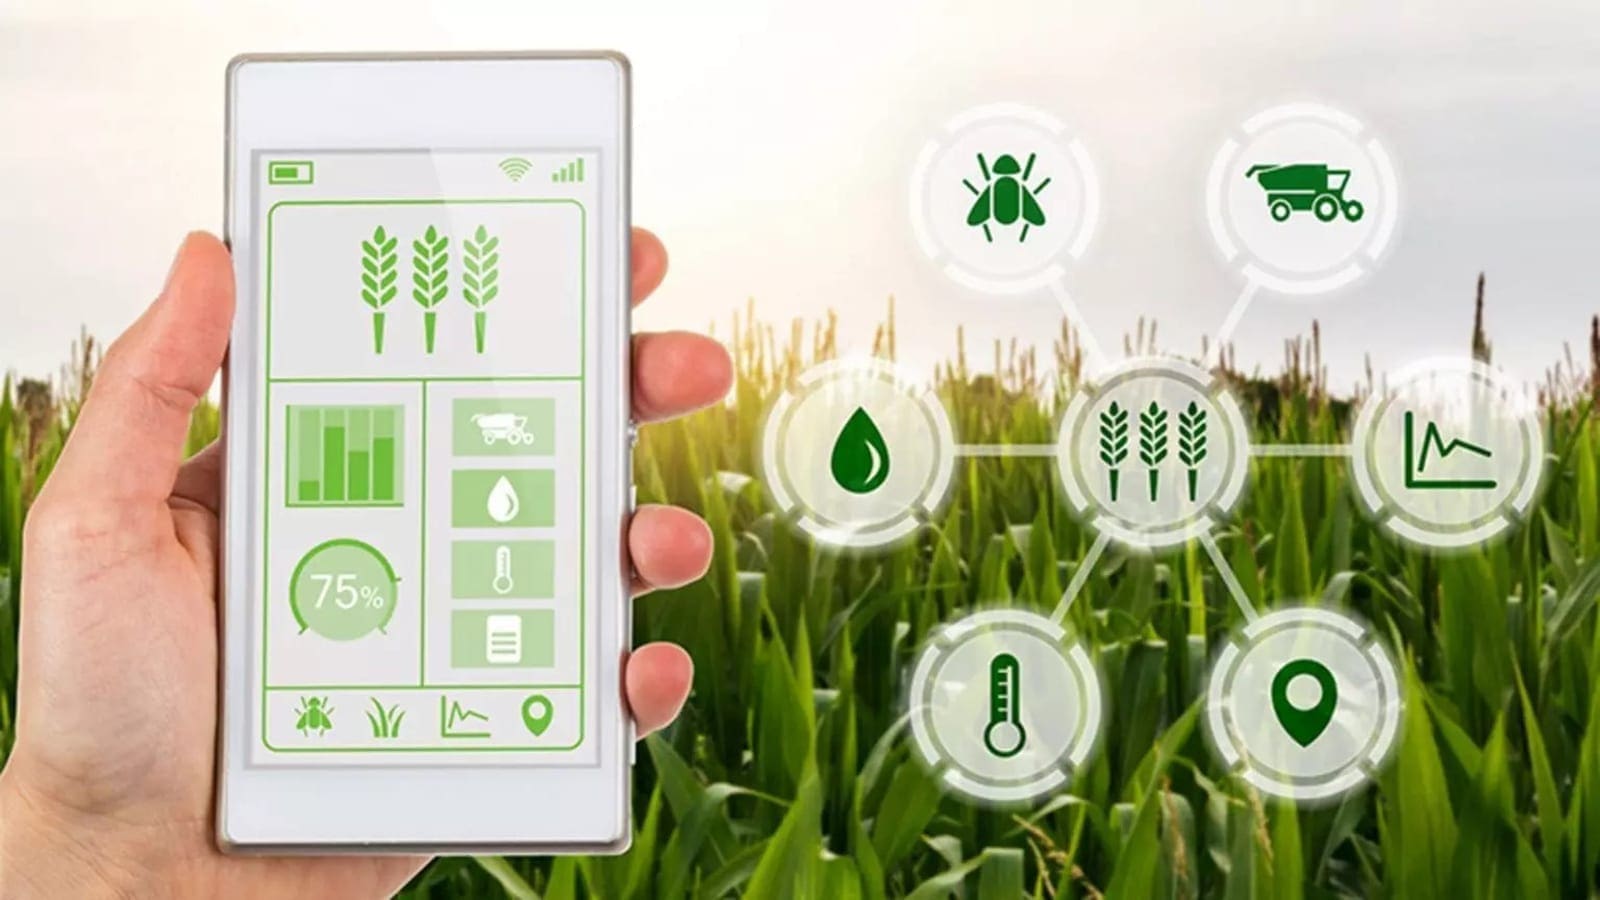 Smart irrigation company SupPlant raises US$10m to grow presence in South Africa